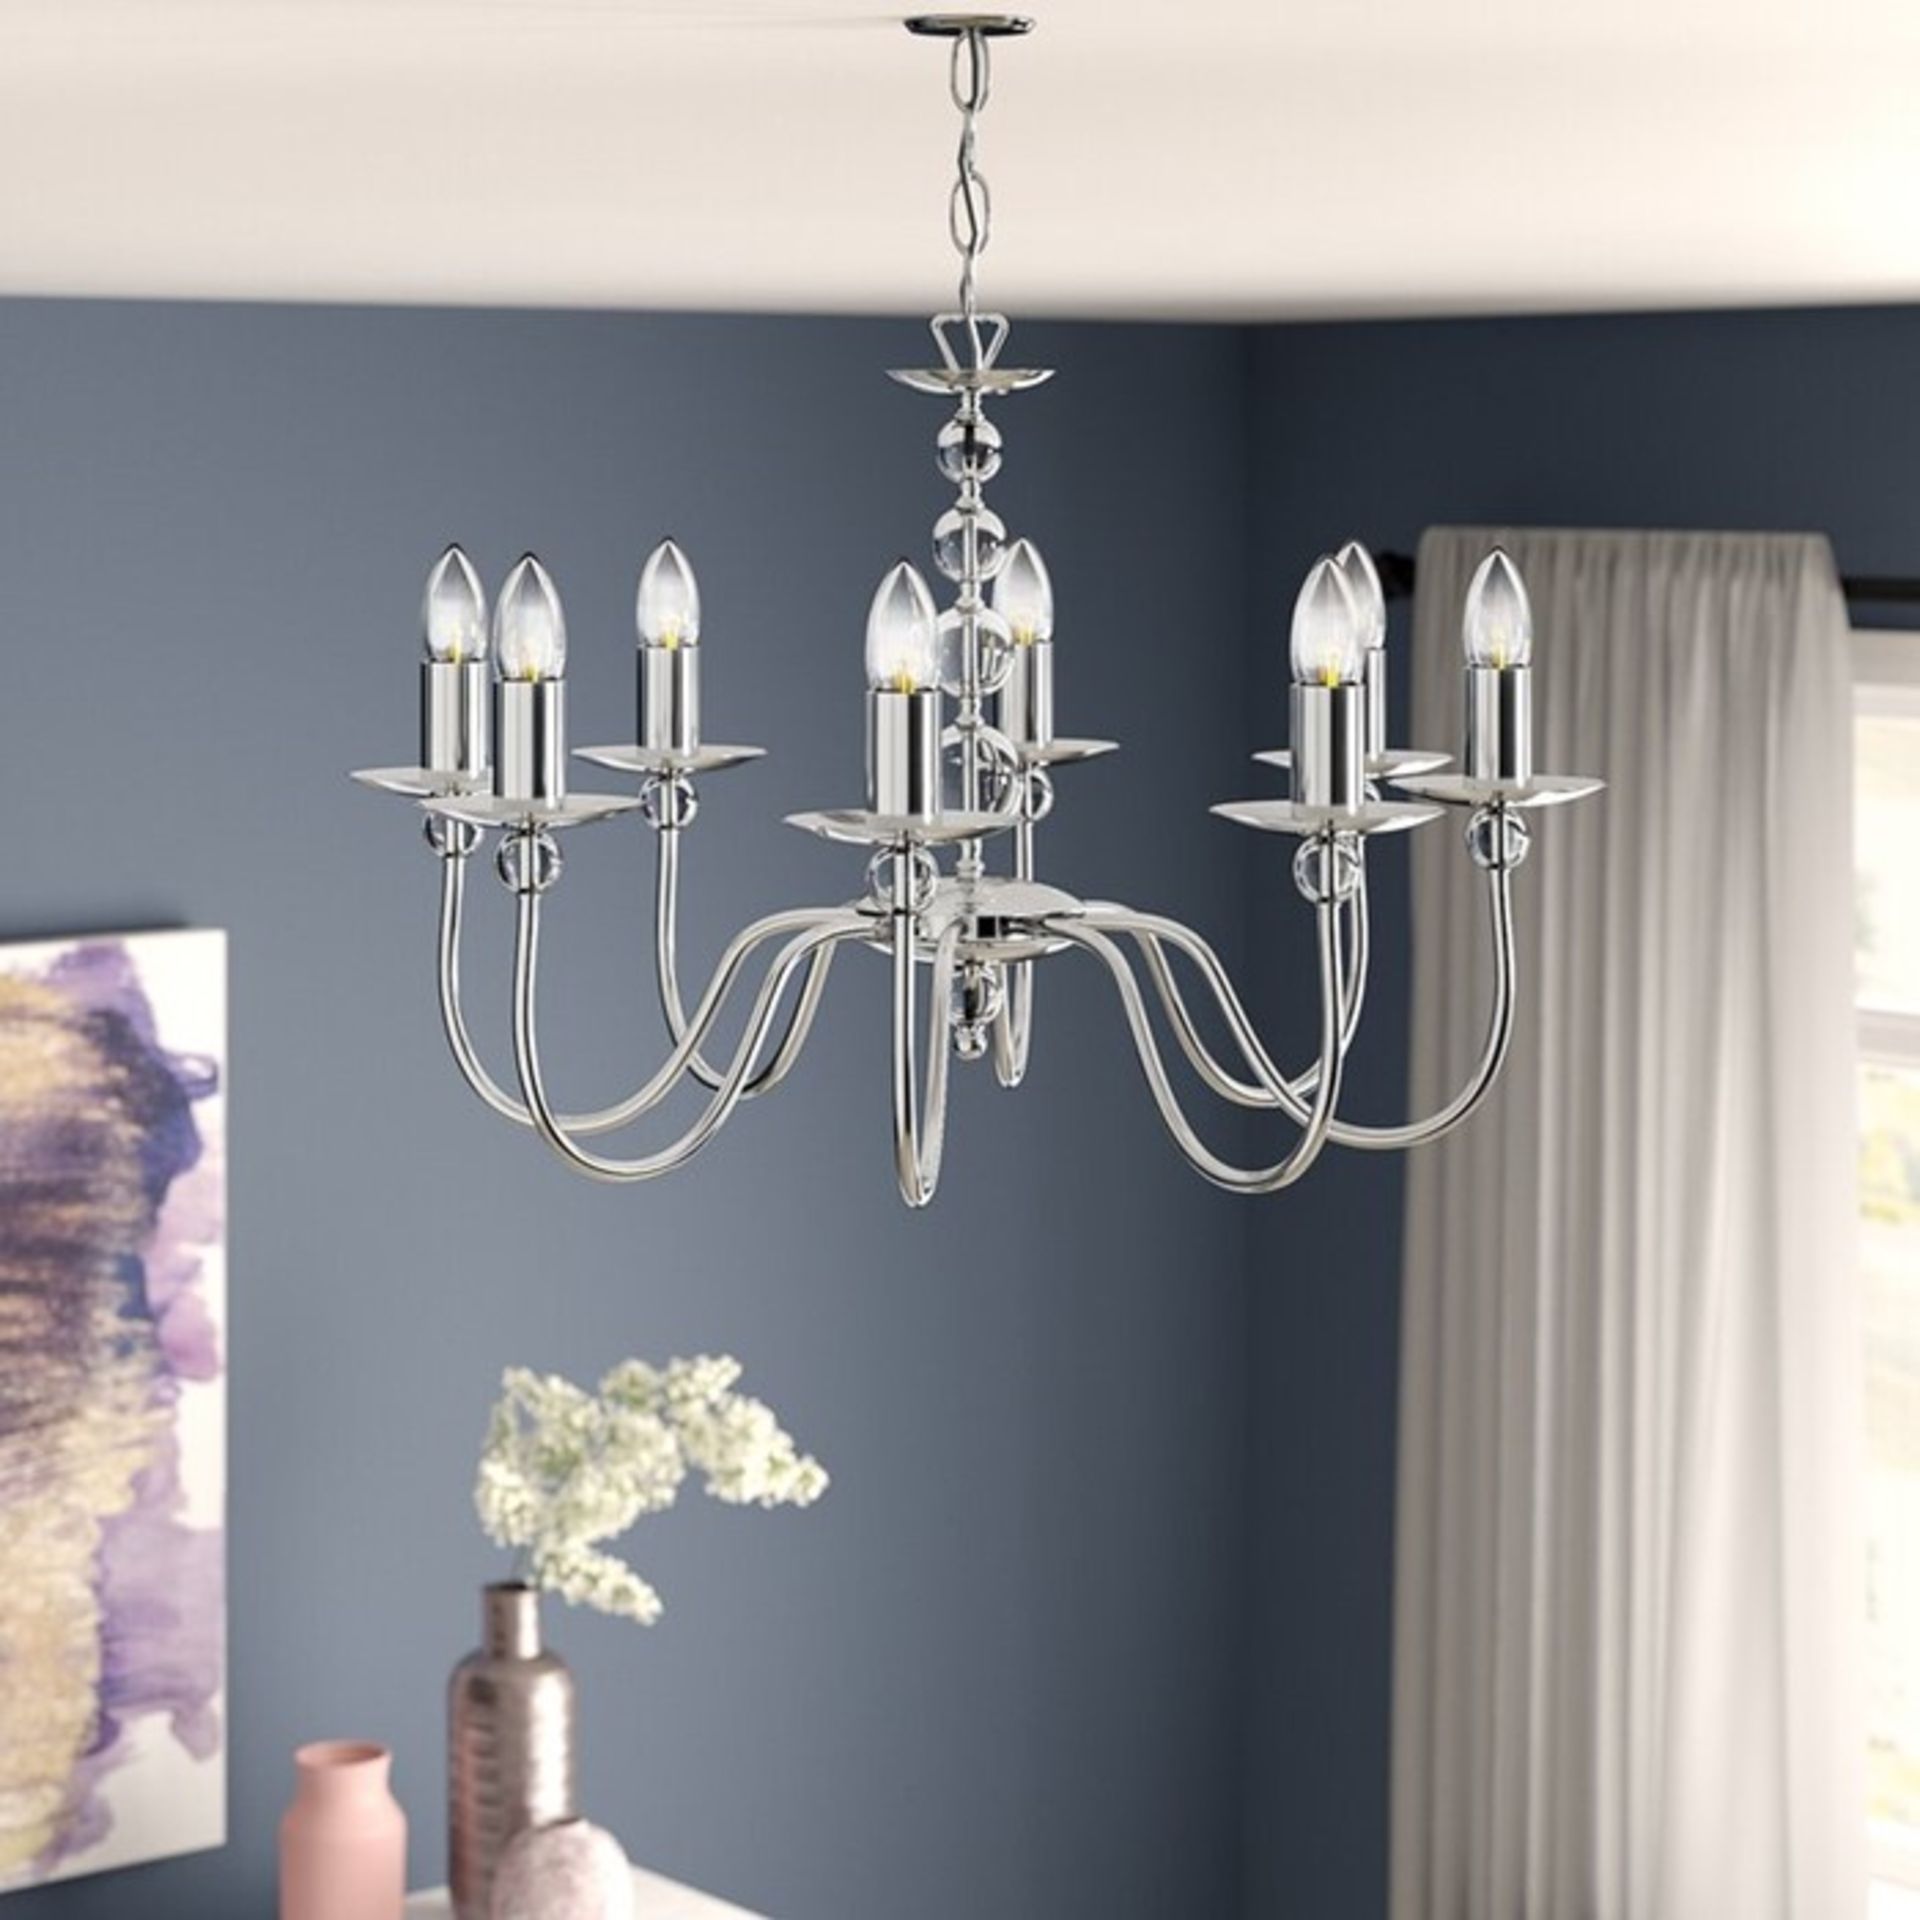 Marlow Home Co. Maeva 8-Light Candle Style Chandelier (CHROME/CLEAR) - RRP£93.99 (UEL1467 - 15837/